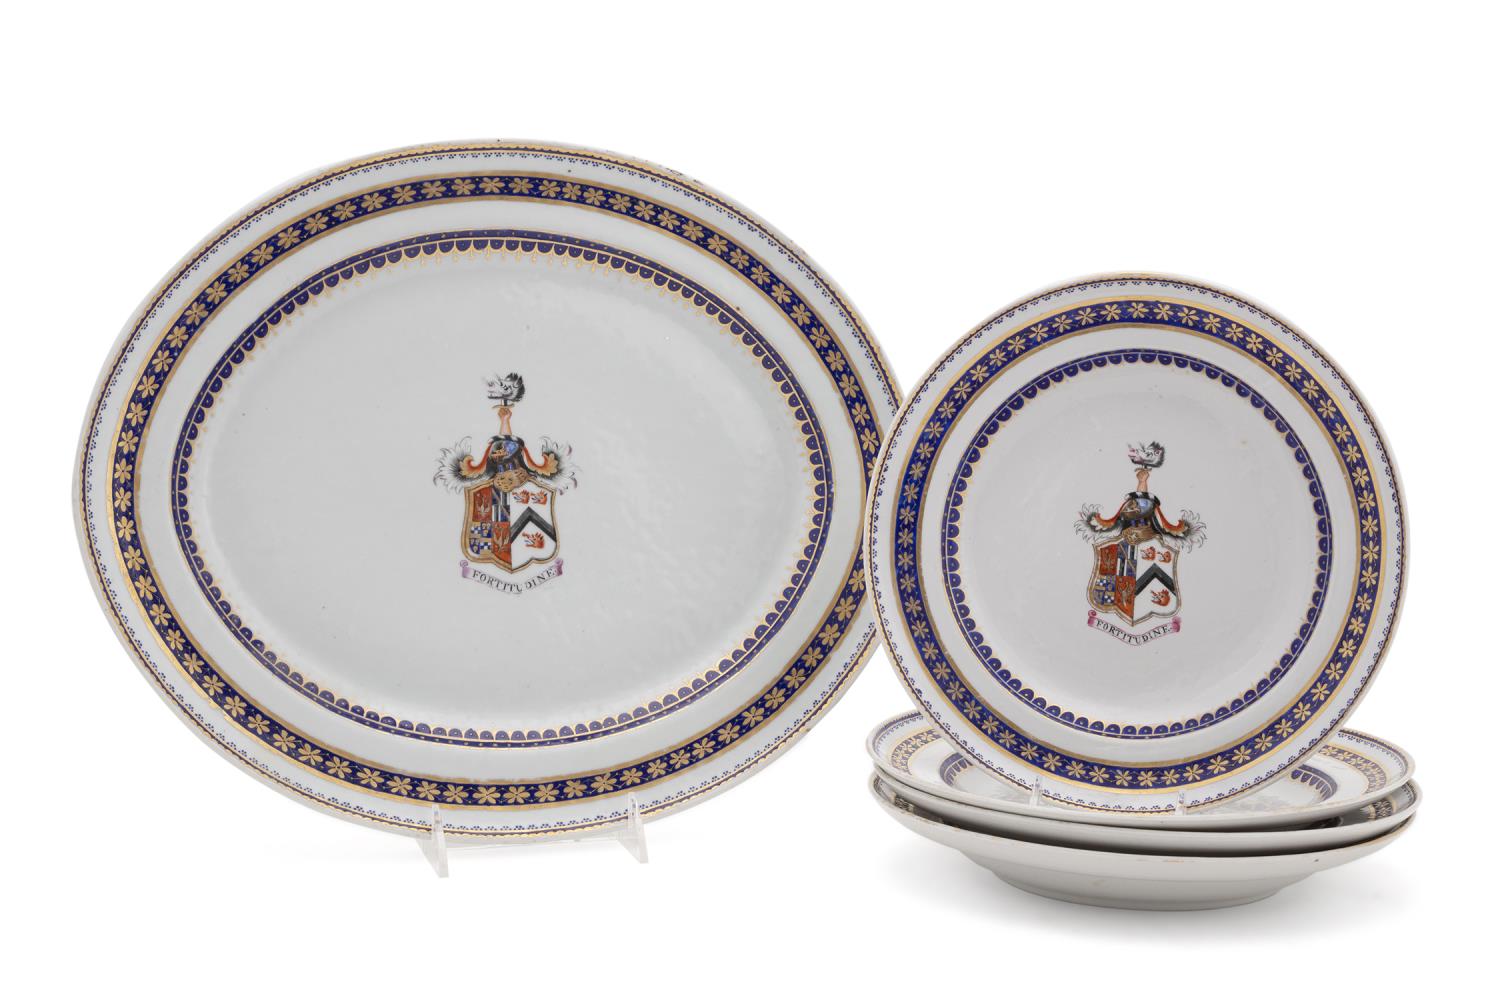 5PCS CHINESE EXPORT ARMORIAL PORCELAIN